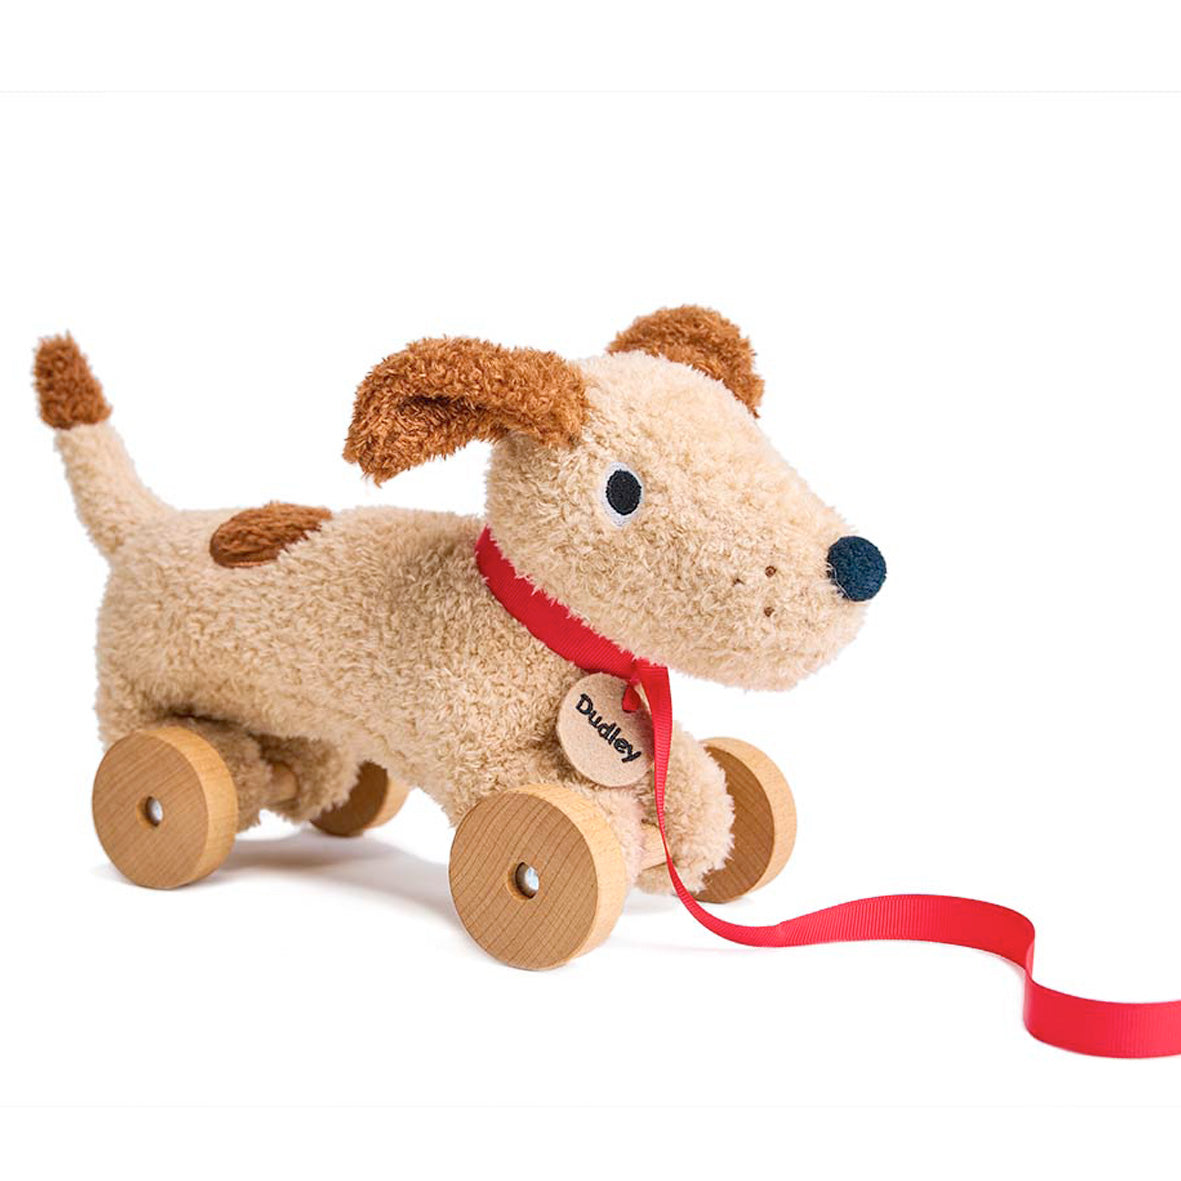 tender leaf toys pull along beige dudly dog with a red lead and collar and name tag